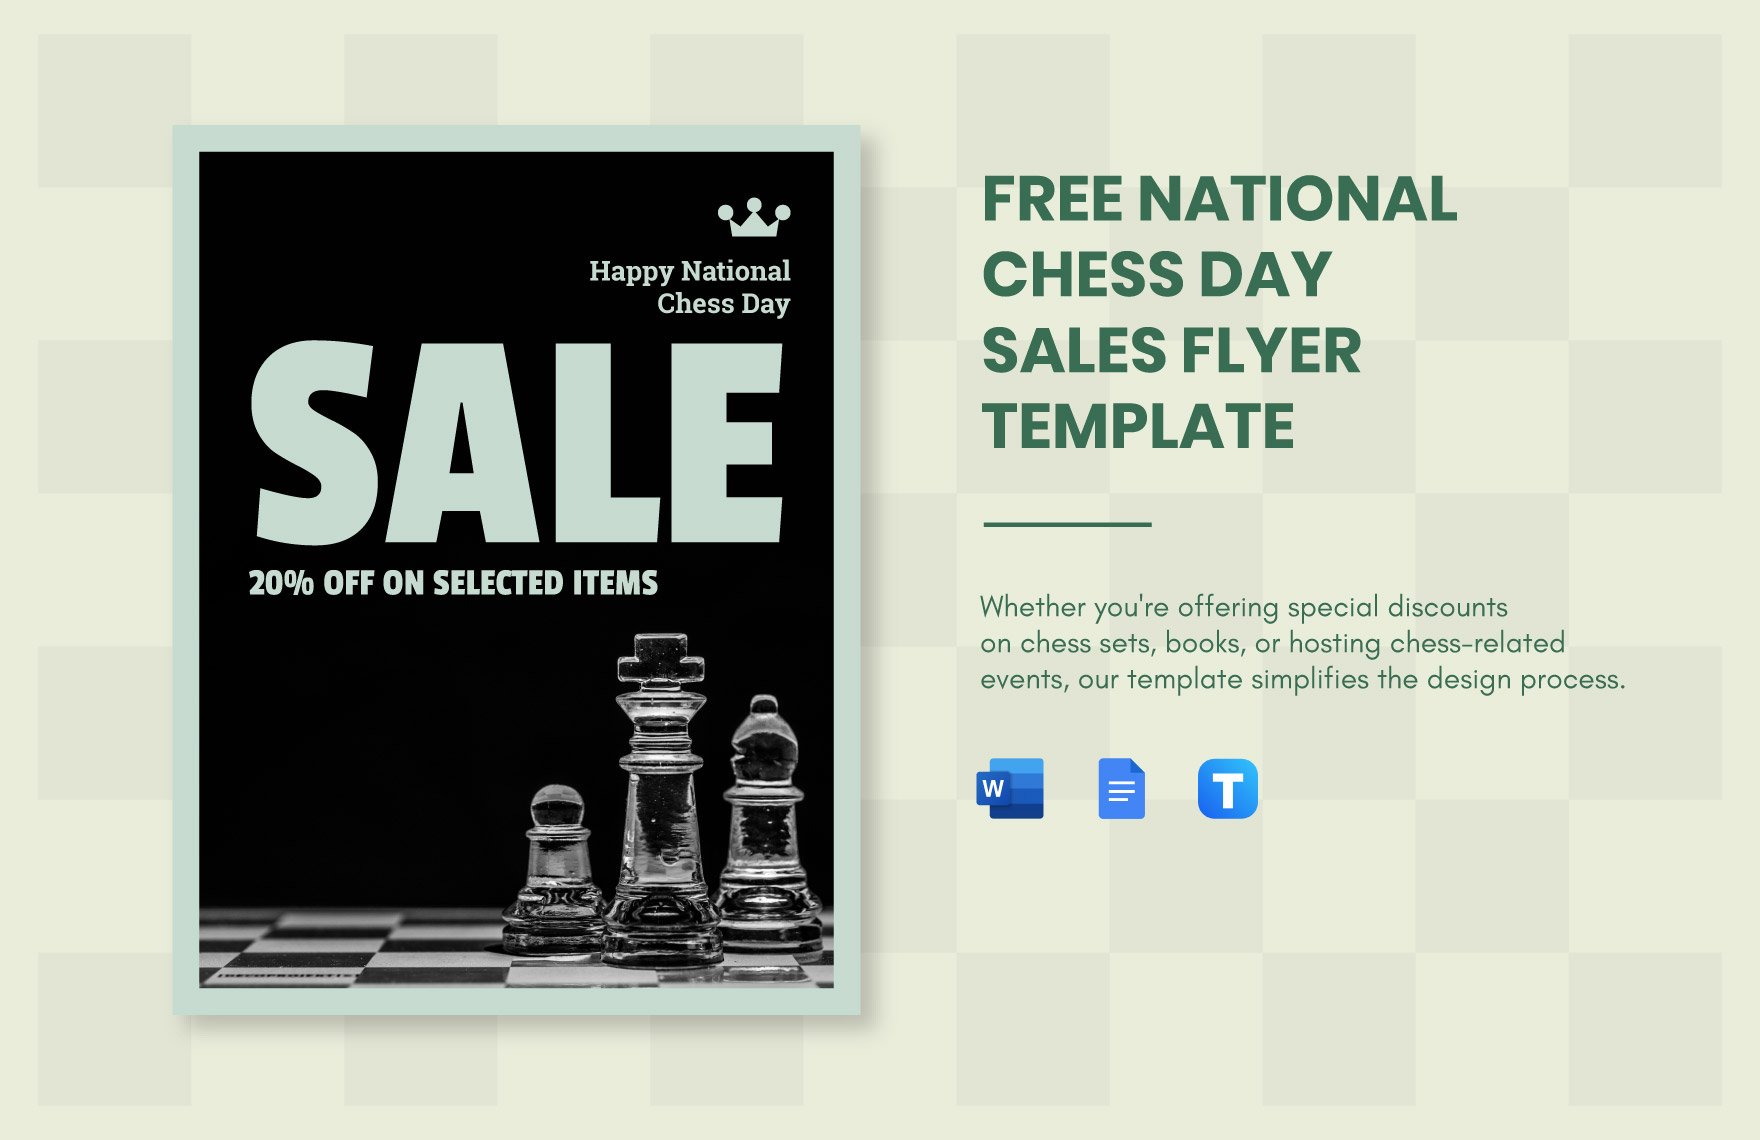 National Chess Day Sales Flyer Template